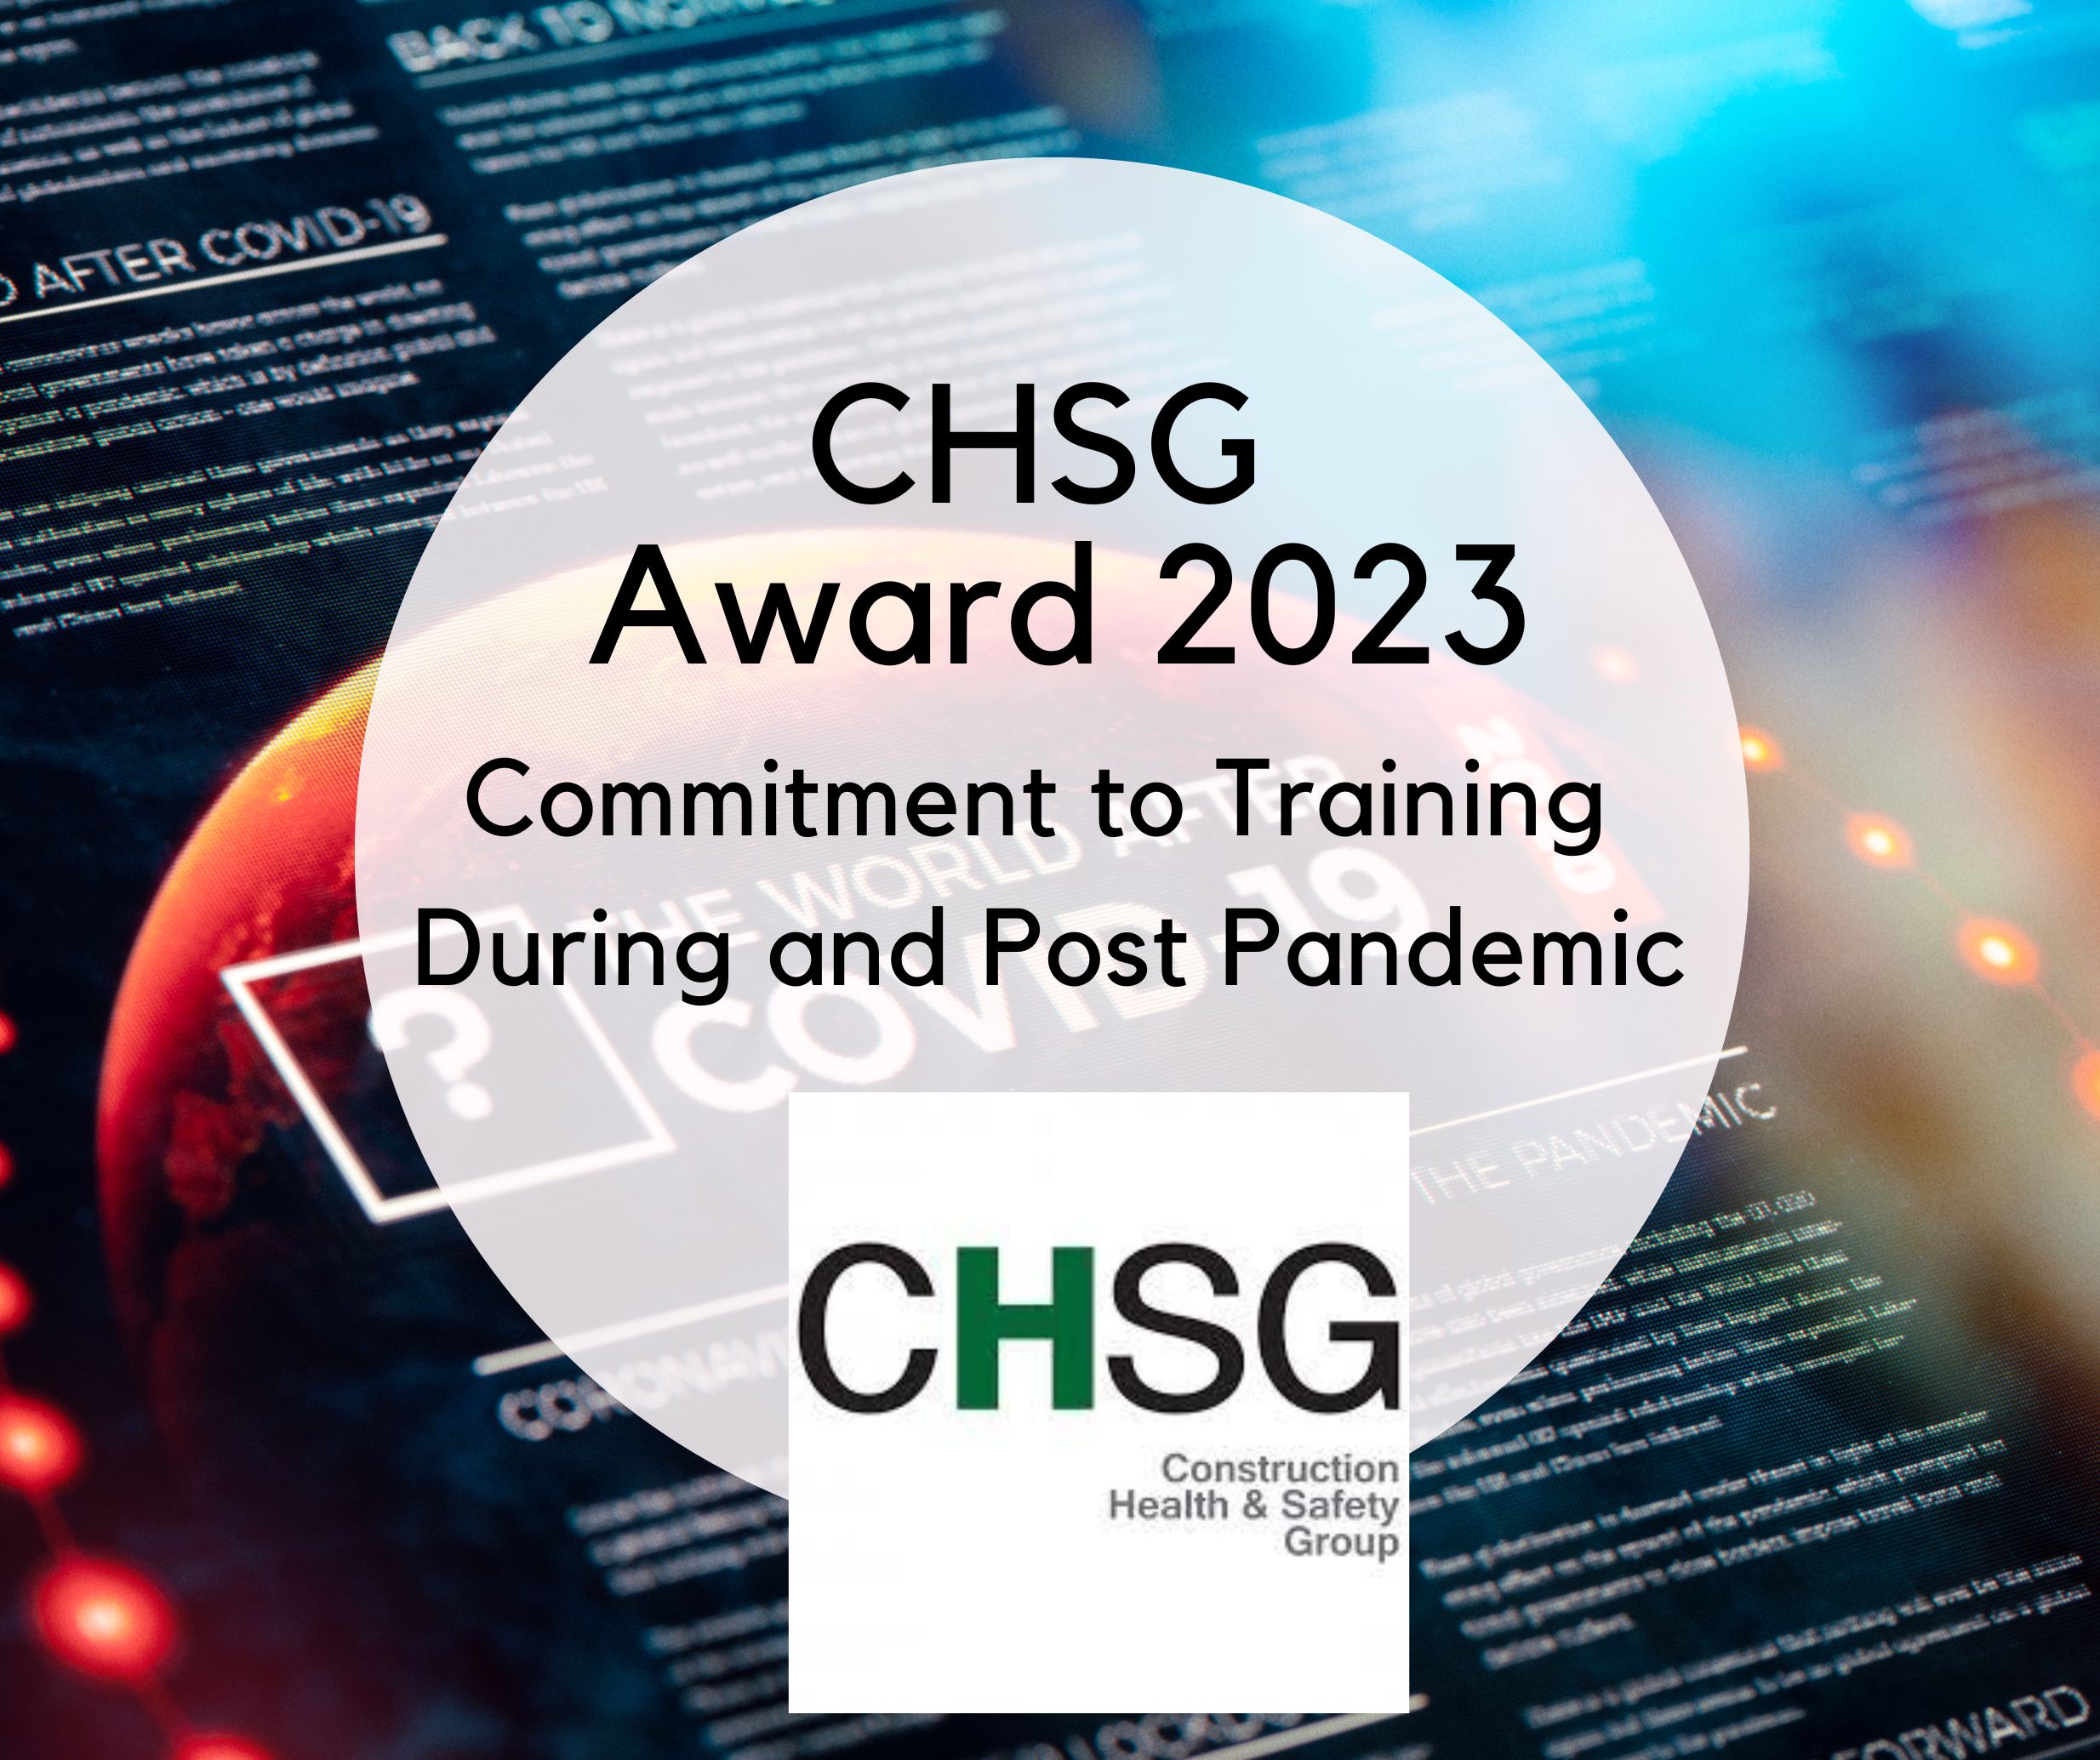 CHSG Award 2023 for Commitment to Training During and Post Pandemic.